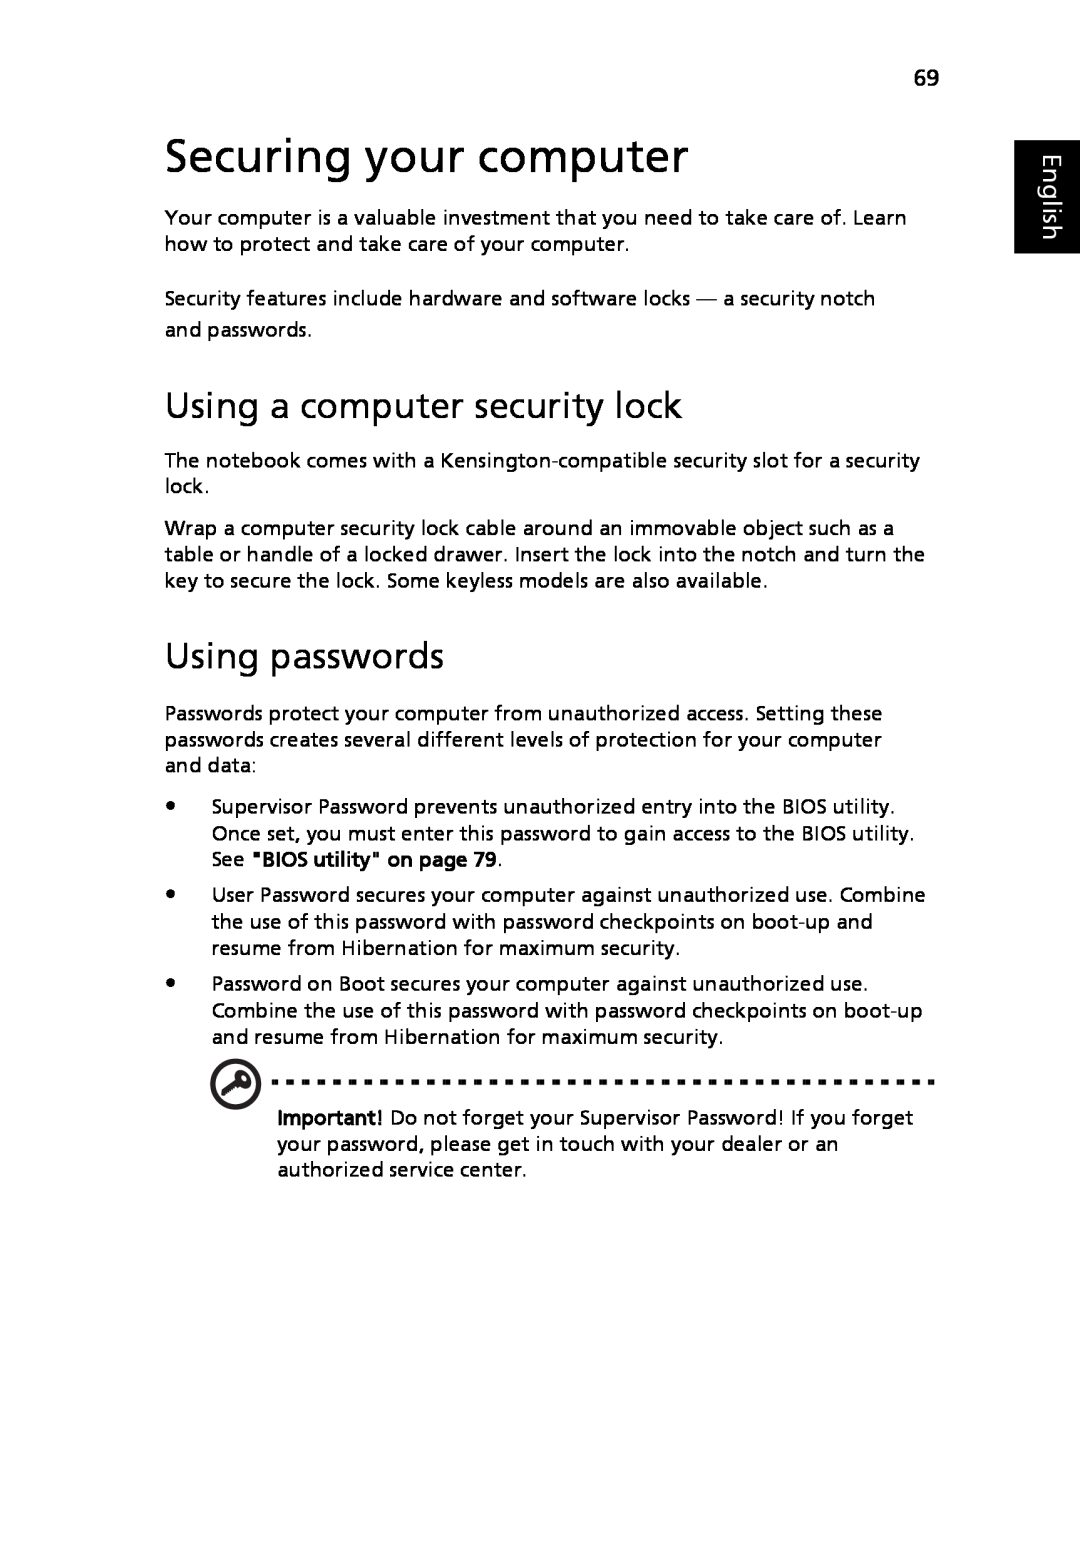 Acer 5520G, 5220 manual Securing your computer, Using a computer security lock, Using passwords, English 